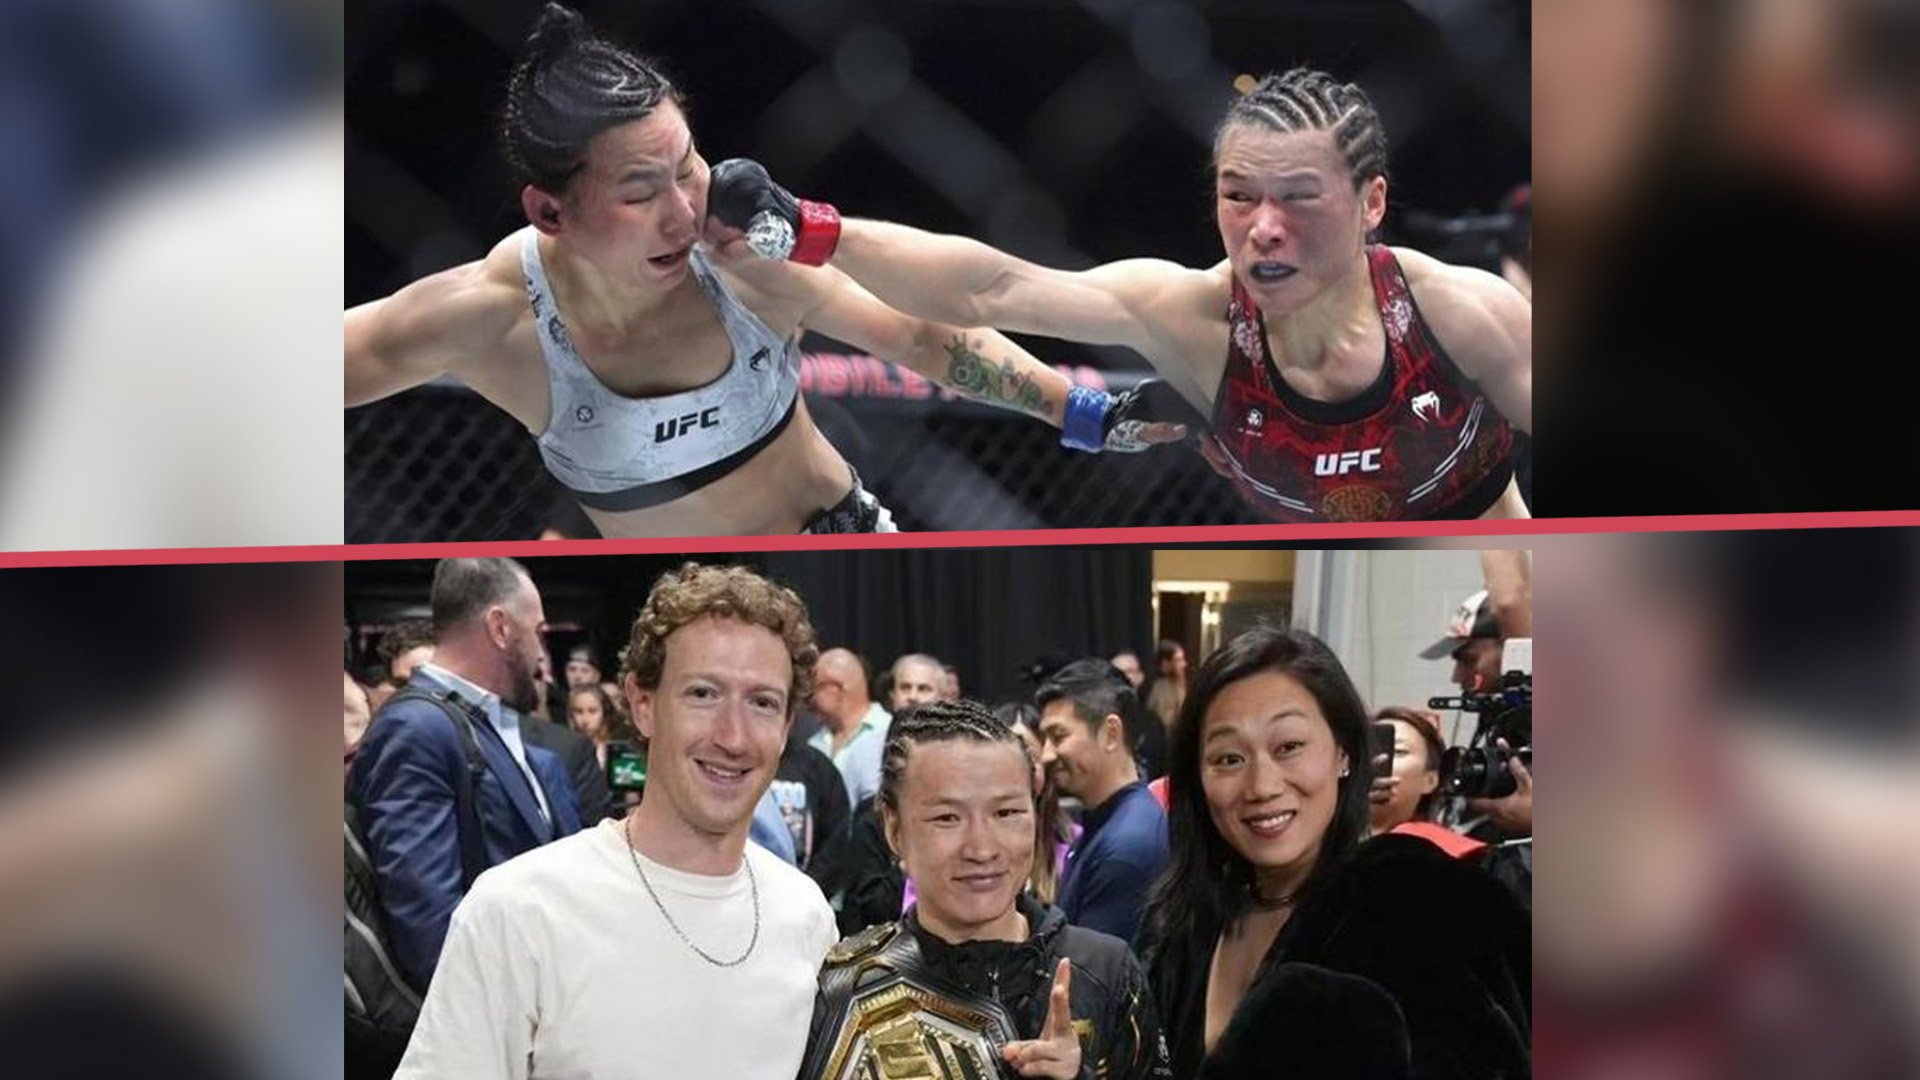 Zhang Weili, China’s first UFC champion and mixed martial arts (MMA) icon lets nothing distract her before a fight, even her best known fans, Mark Zuckerberg and his wife Priscilla Chan. The Post profiles China’s champion. Photo: SCMP composite/Sina.com